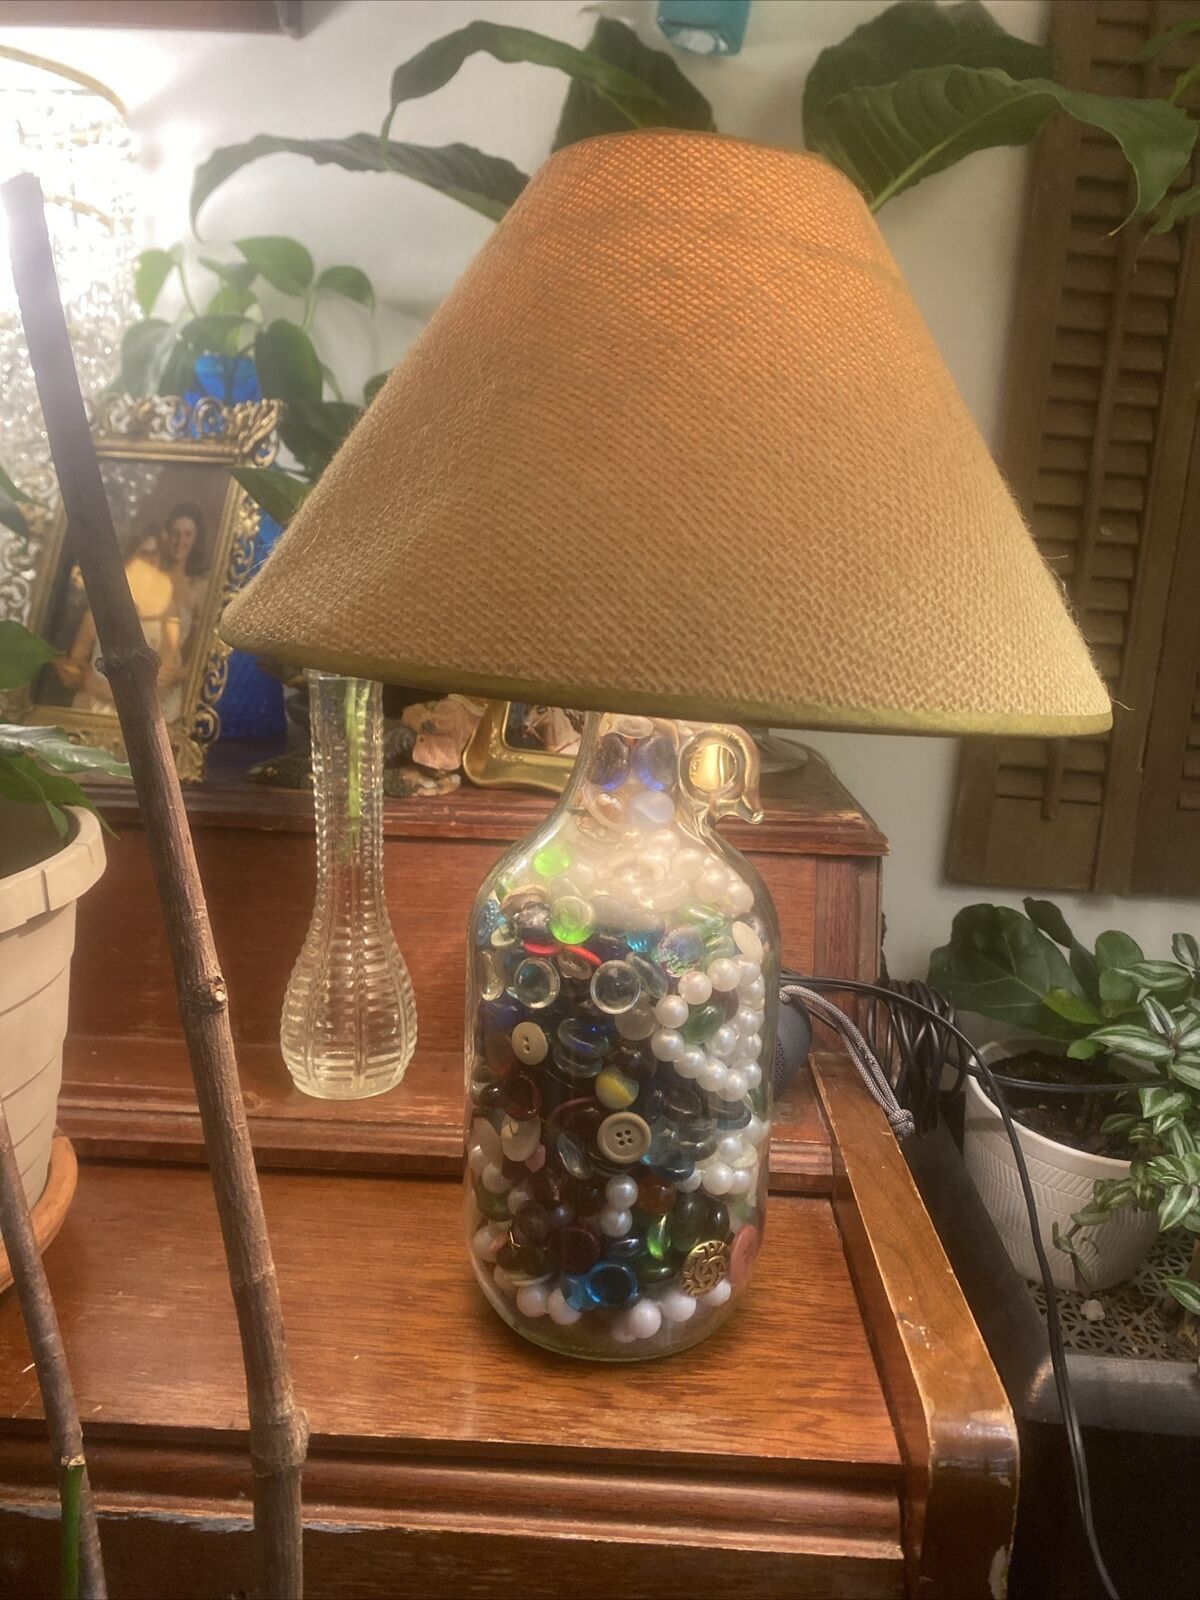 Clear Jug Lamp With Marbles, Beads, Buttons & Rocks-Medium Sized Lamp